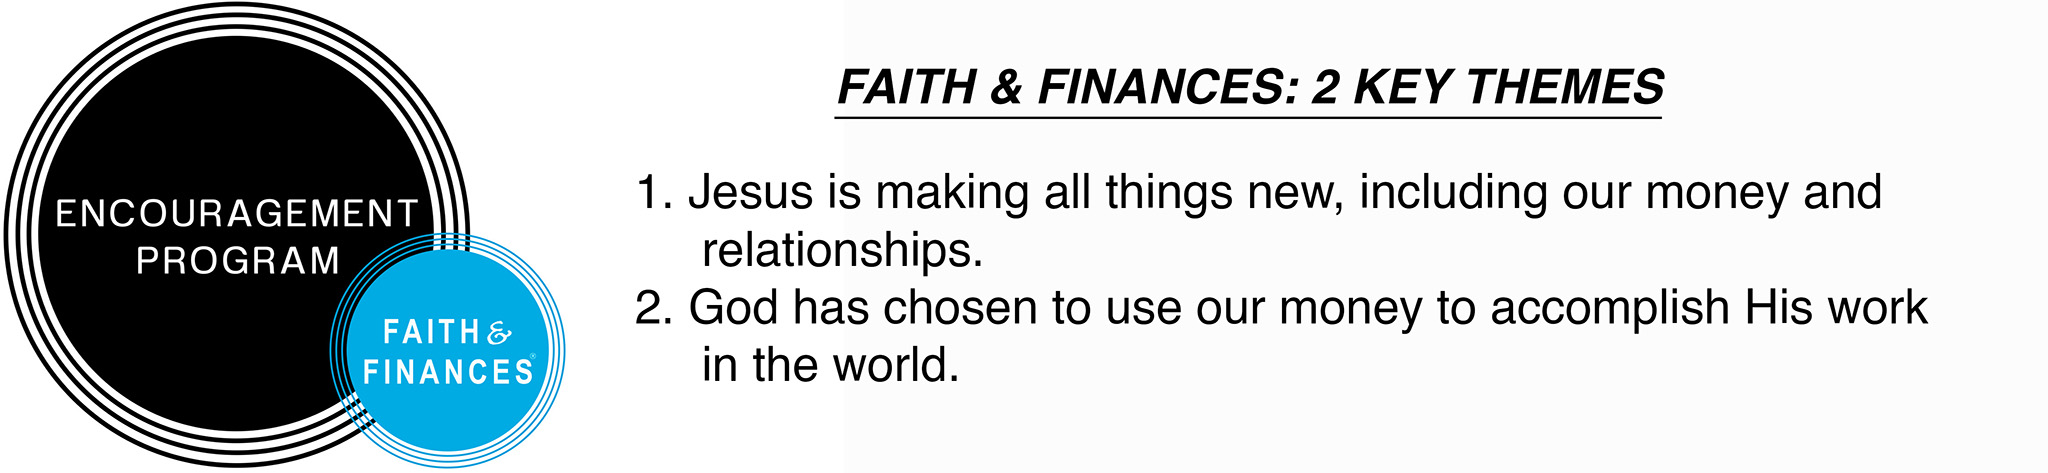 2 key themes of Faith and Finance communties